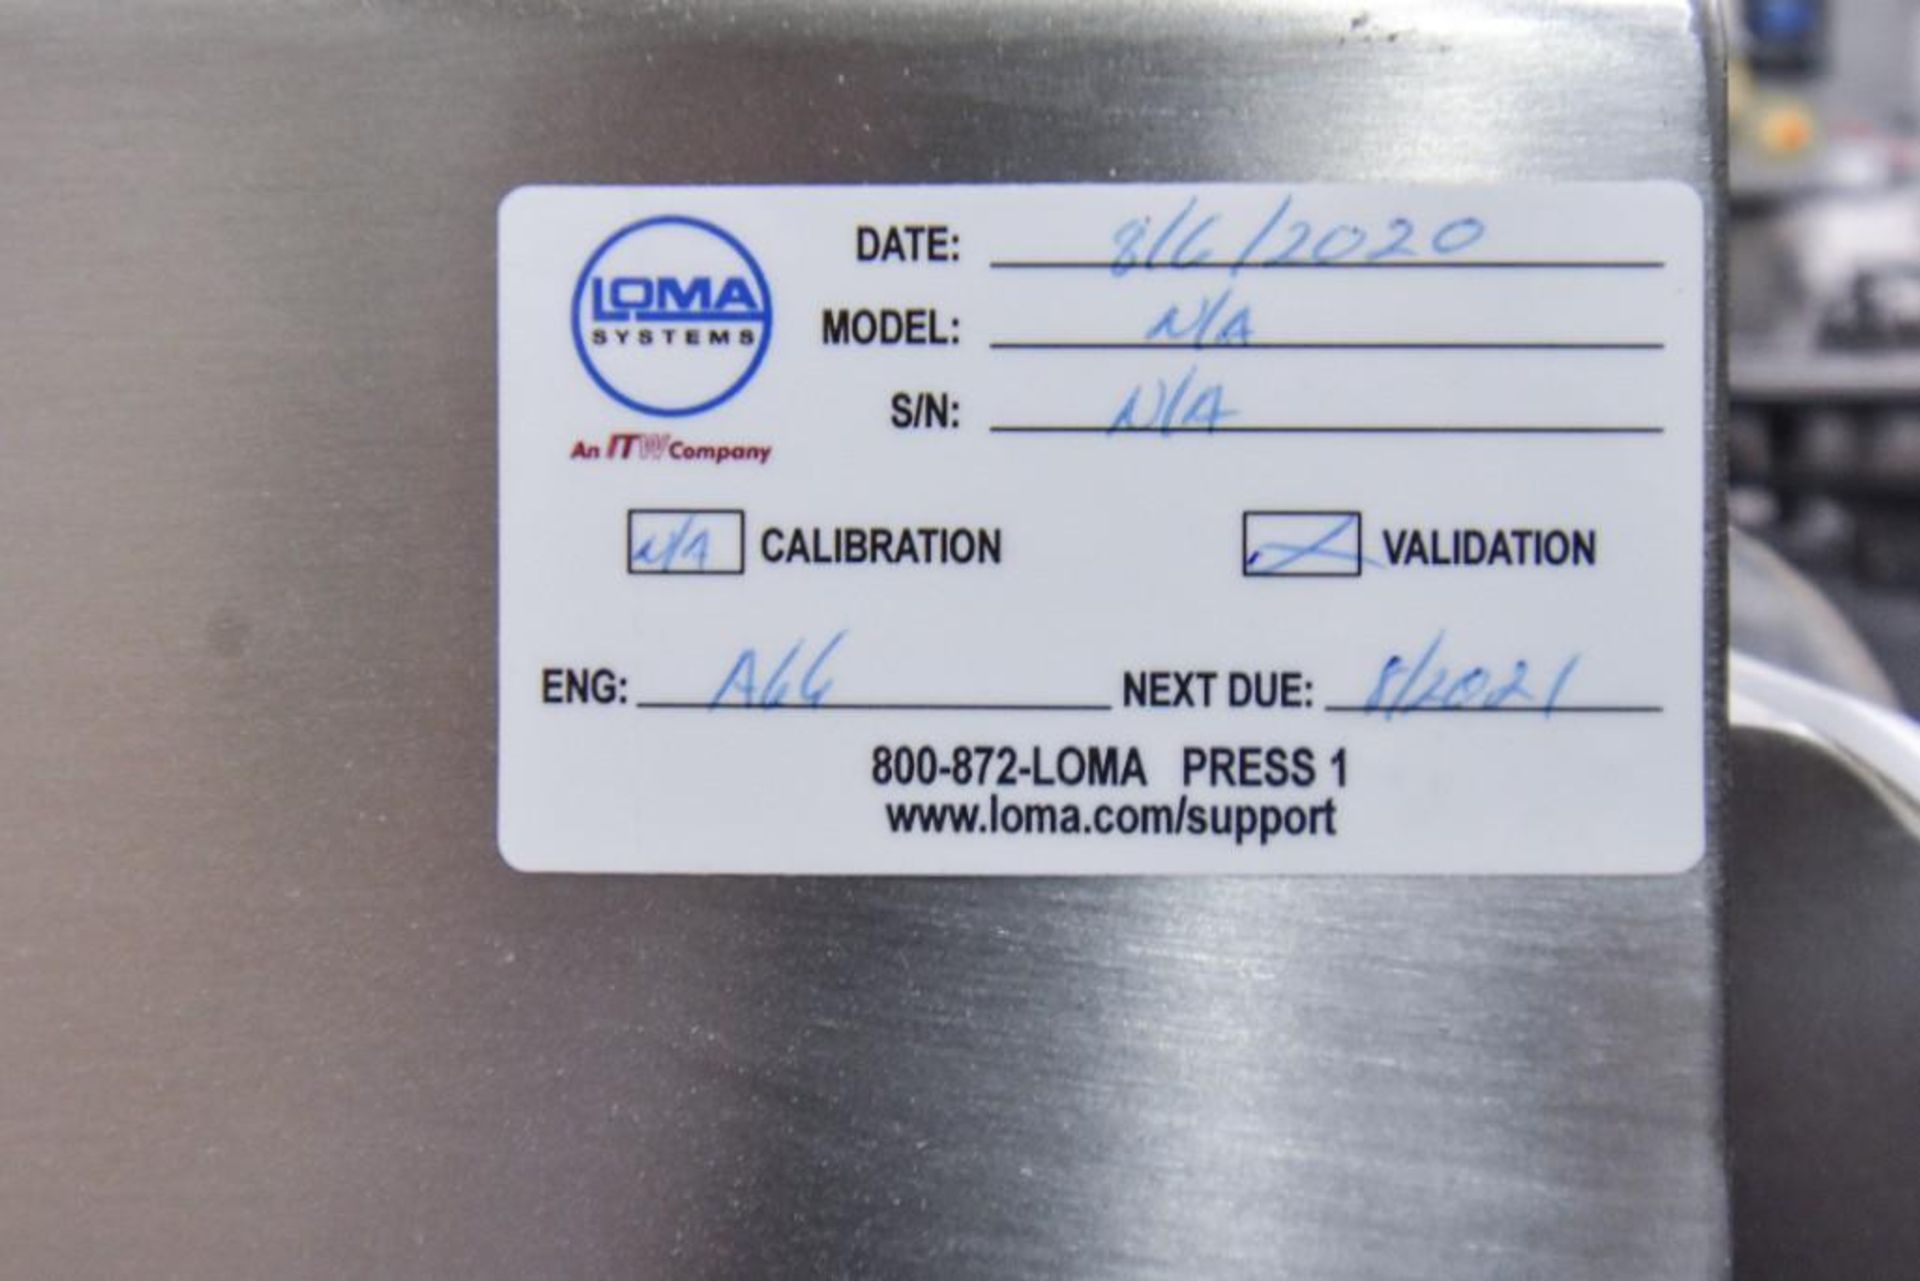 Loma Systems Metal Check - Image 7 of 8